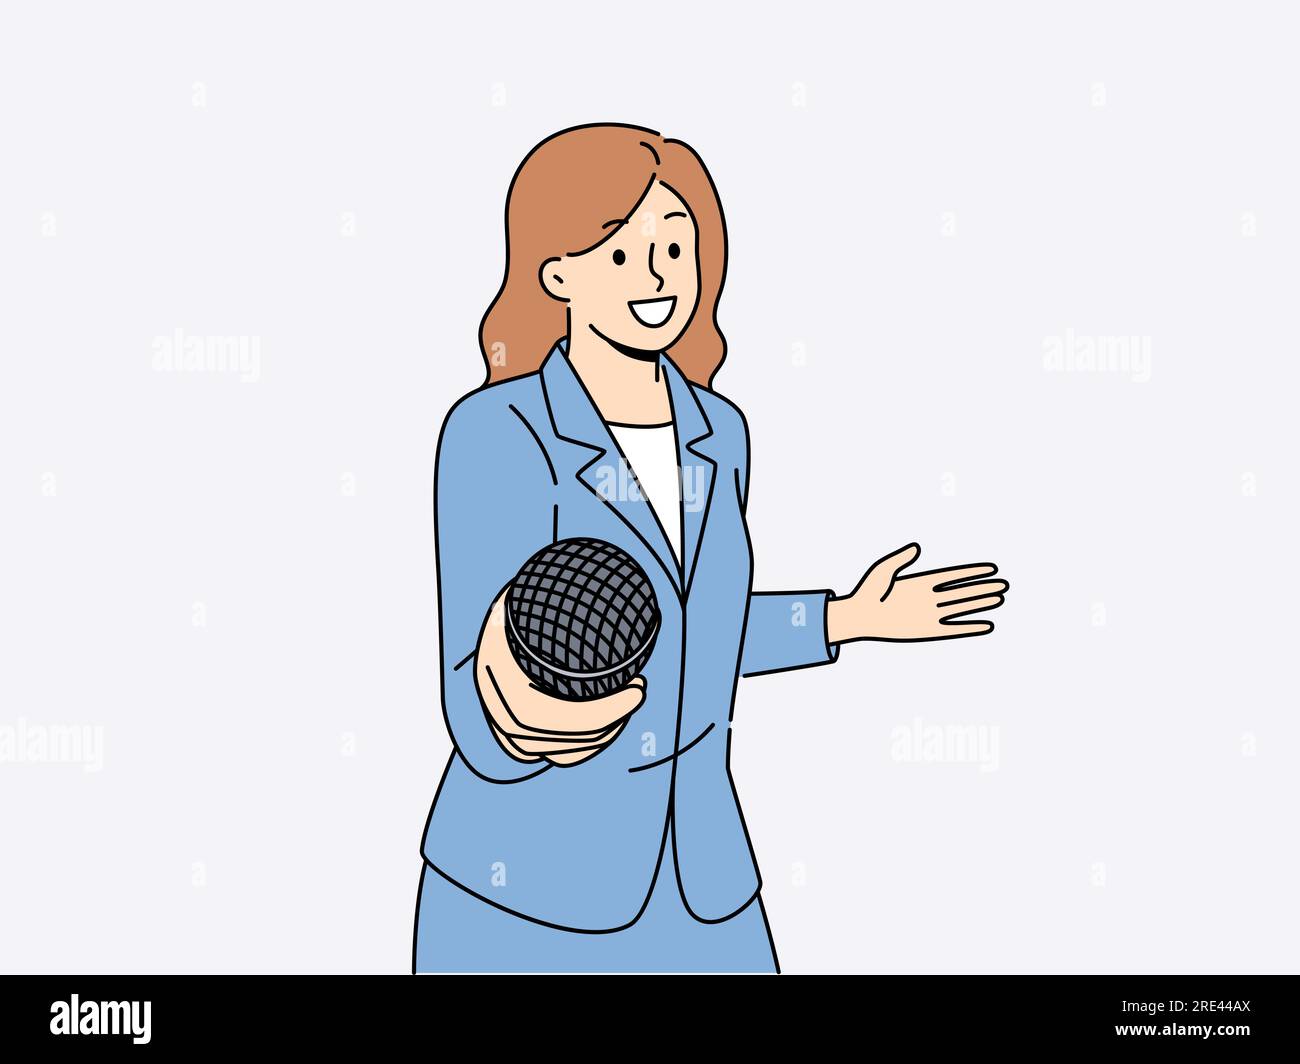 Woman reporter with microphone wants to take interview and asks questions of interlocutor by bringing mike to screen. Girl holds microphone in hand offering you to share opinion on current events. Stock Vector